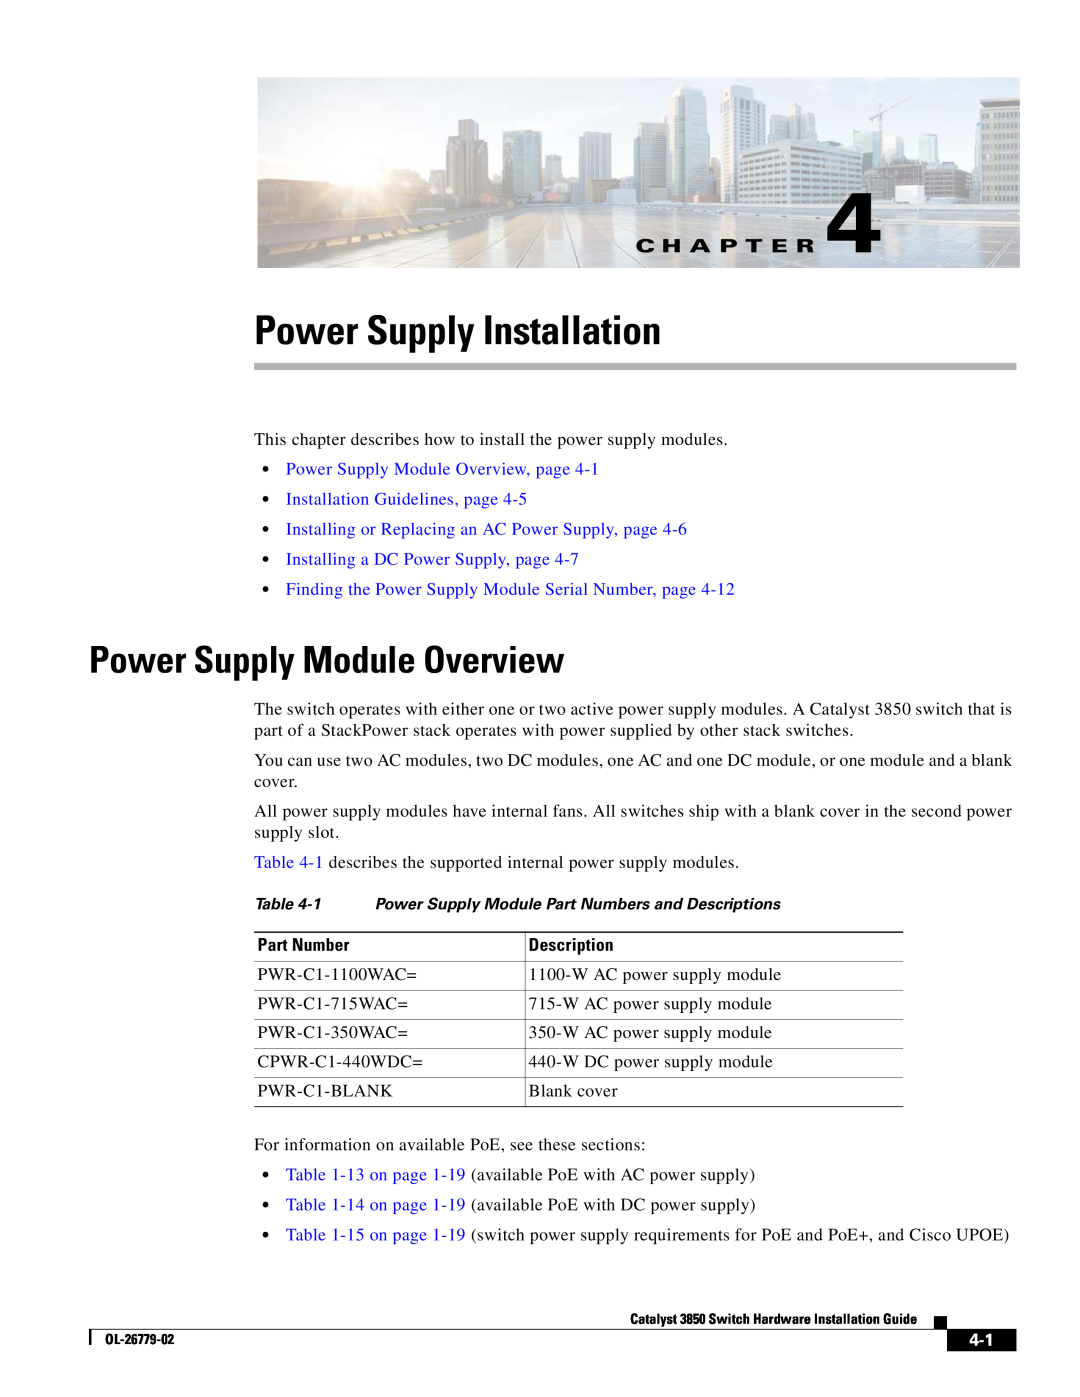 Cisco Systems WSC385024TS Power Supply Installation, Power Supply Module Overview, Installing a DC Power Supply, page 